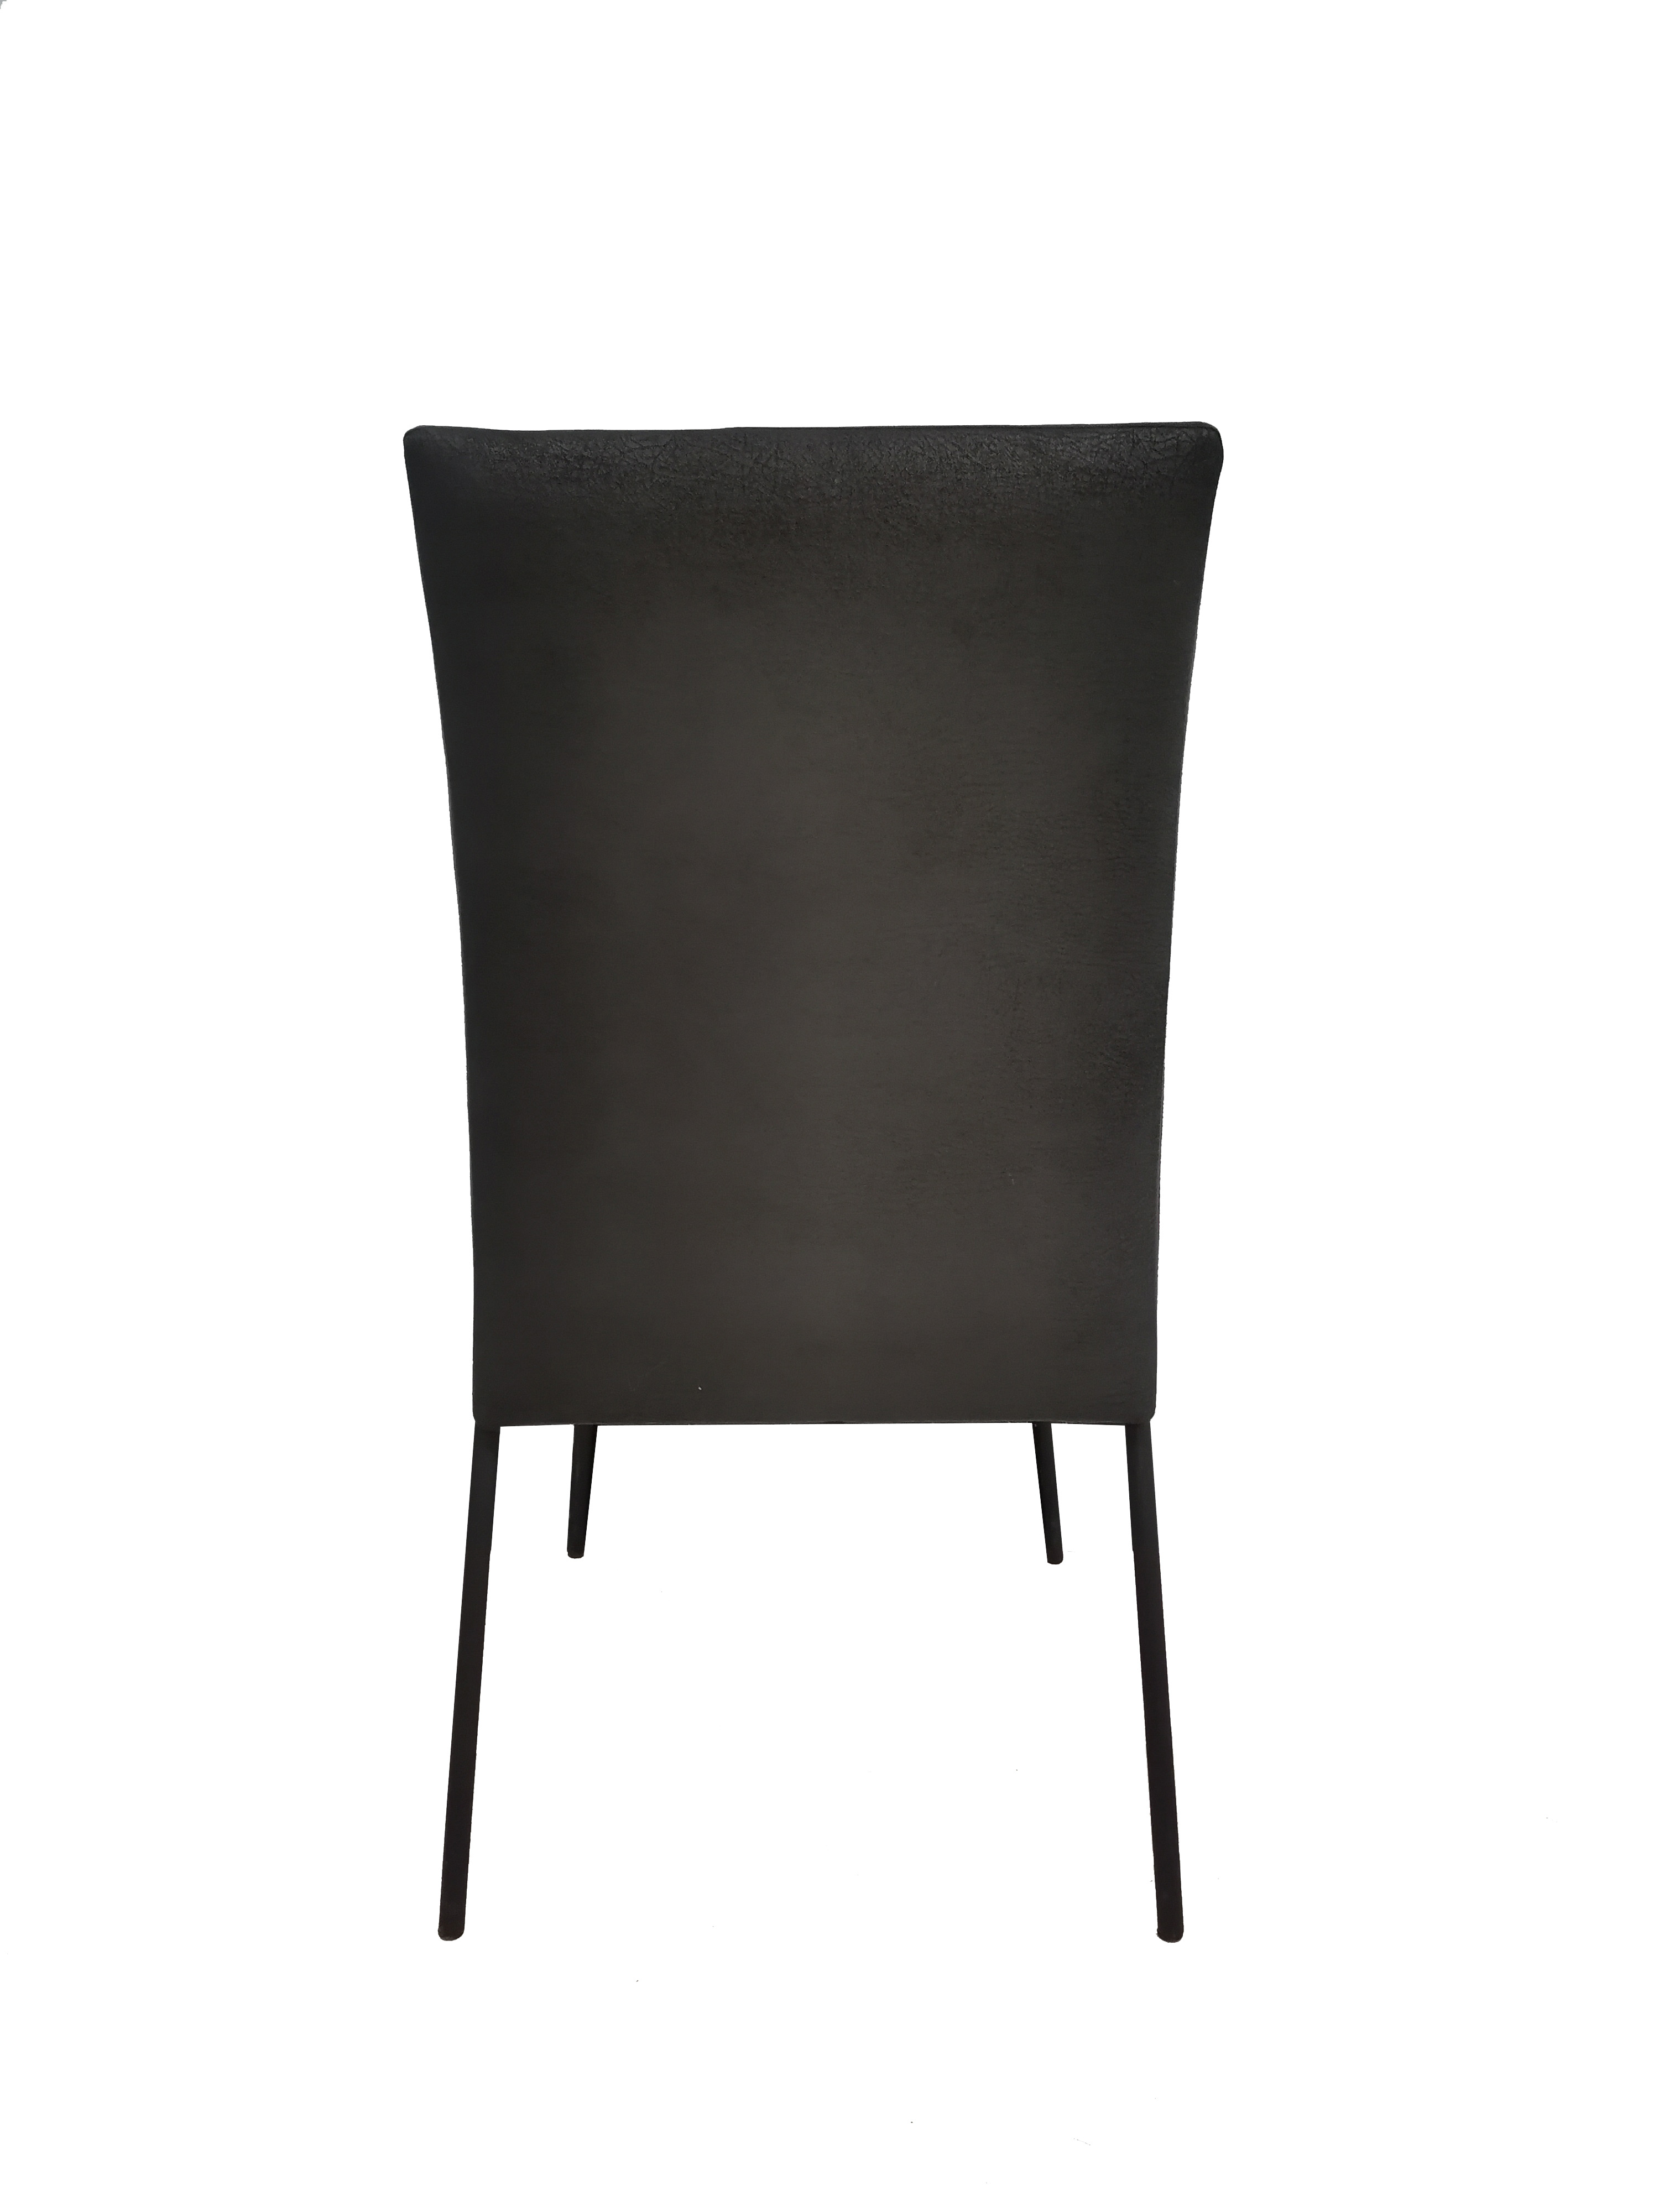 DiningChair Modern Very Cheap Price Wholesale Fabric Dining Chair With Black Powder Coated Metal Frame